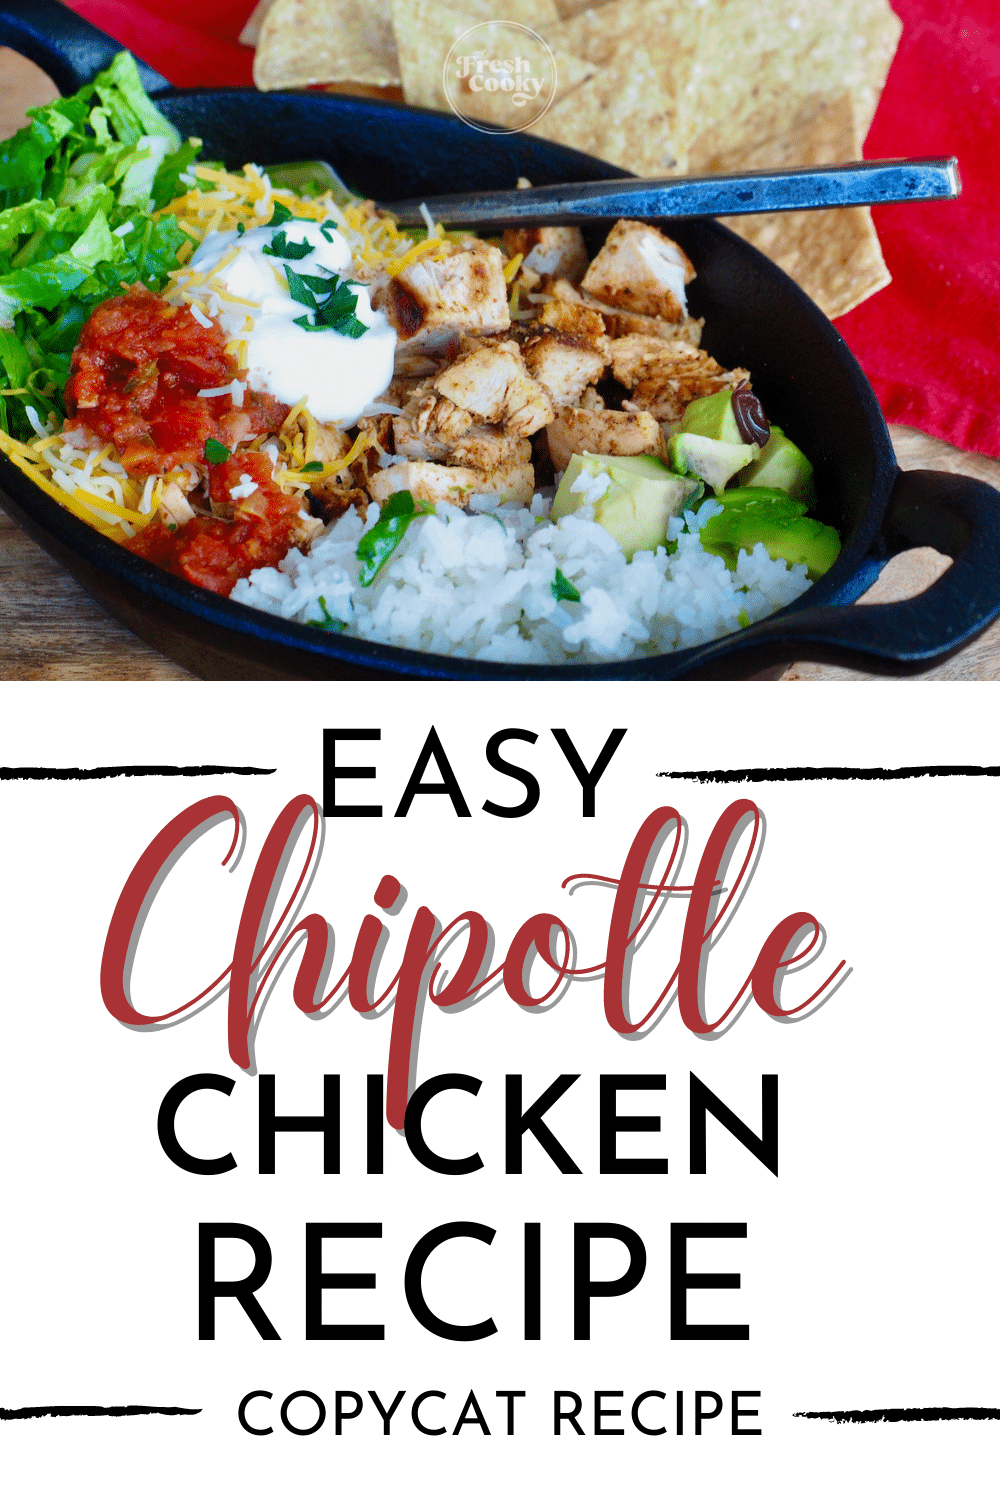 Pin for easy Chipotle chicken recipe copycat, with image of chopped chicken in bowl with cilantro lime rice and toppings.